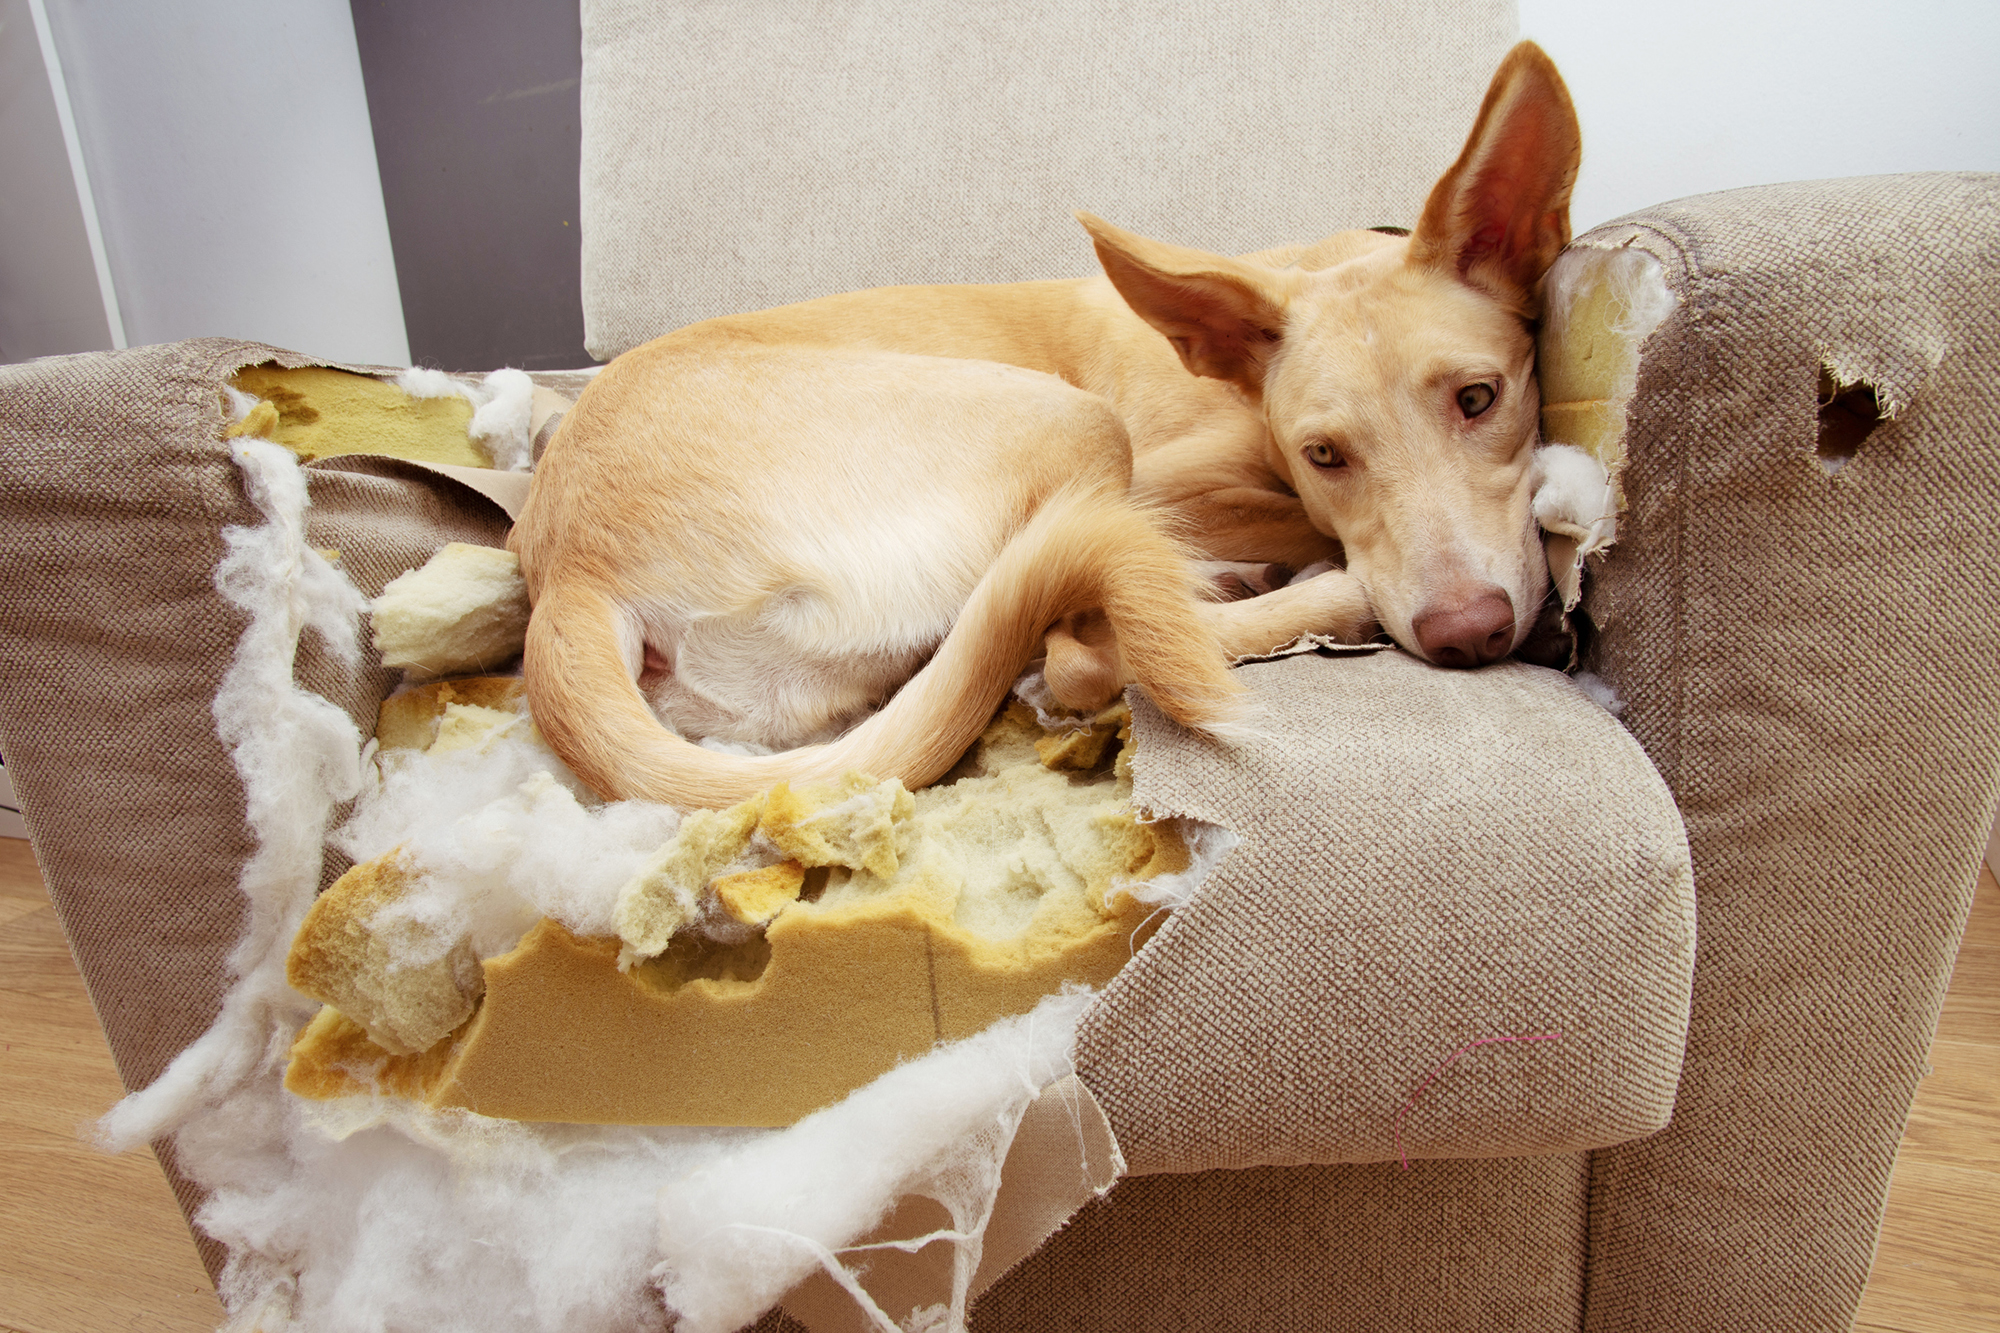 Separation anxiety can lead dogs to destructive behavior